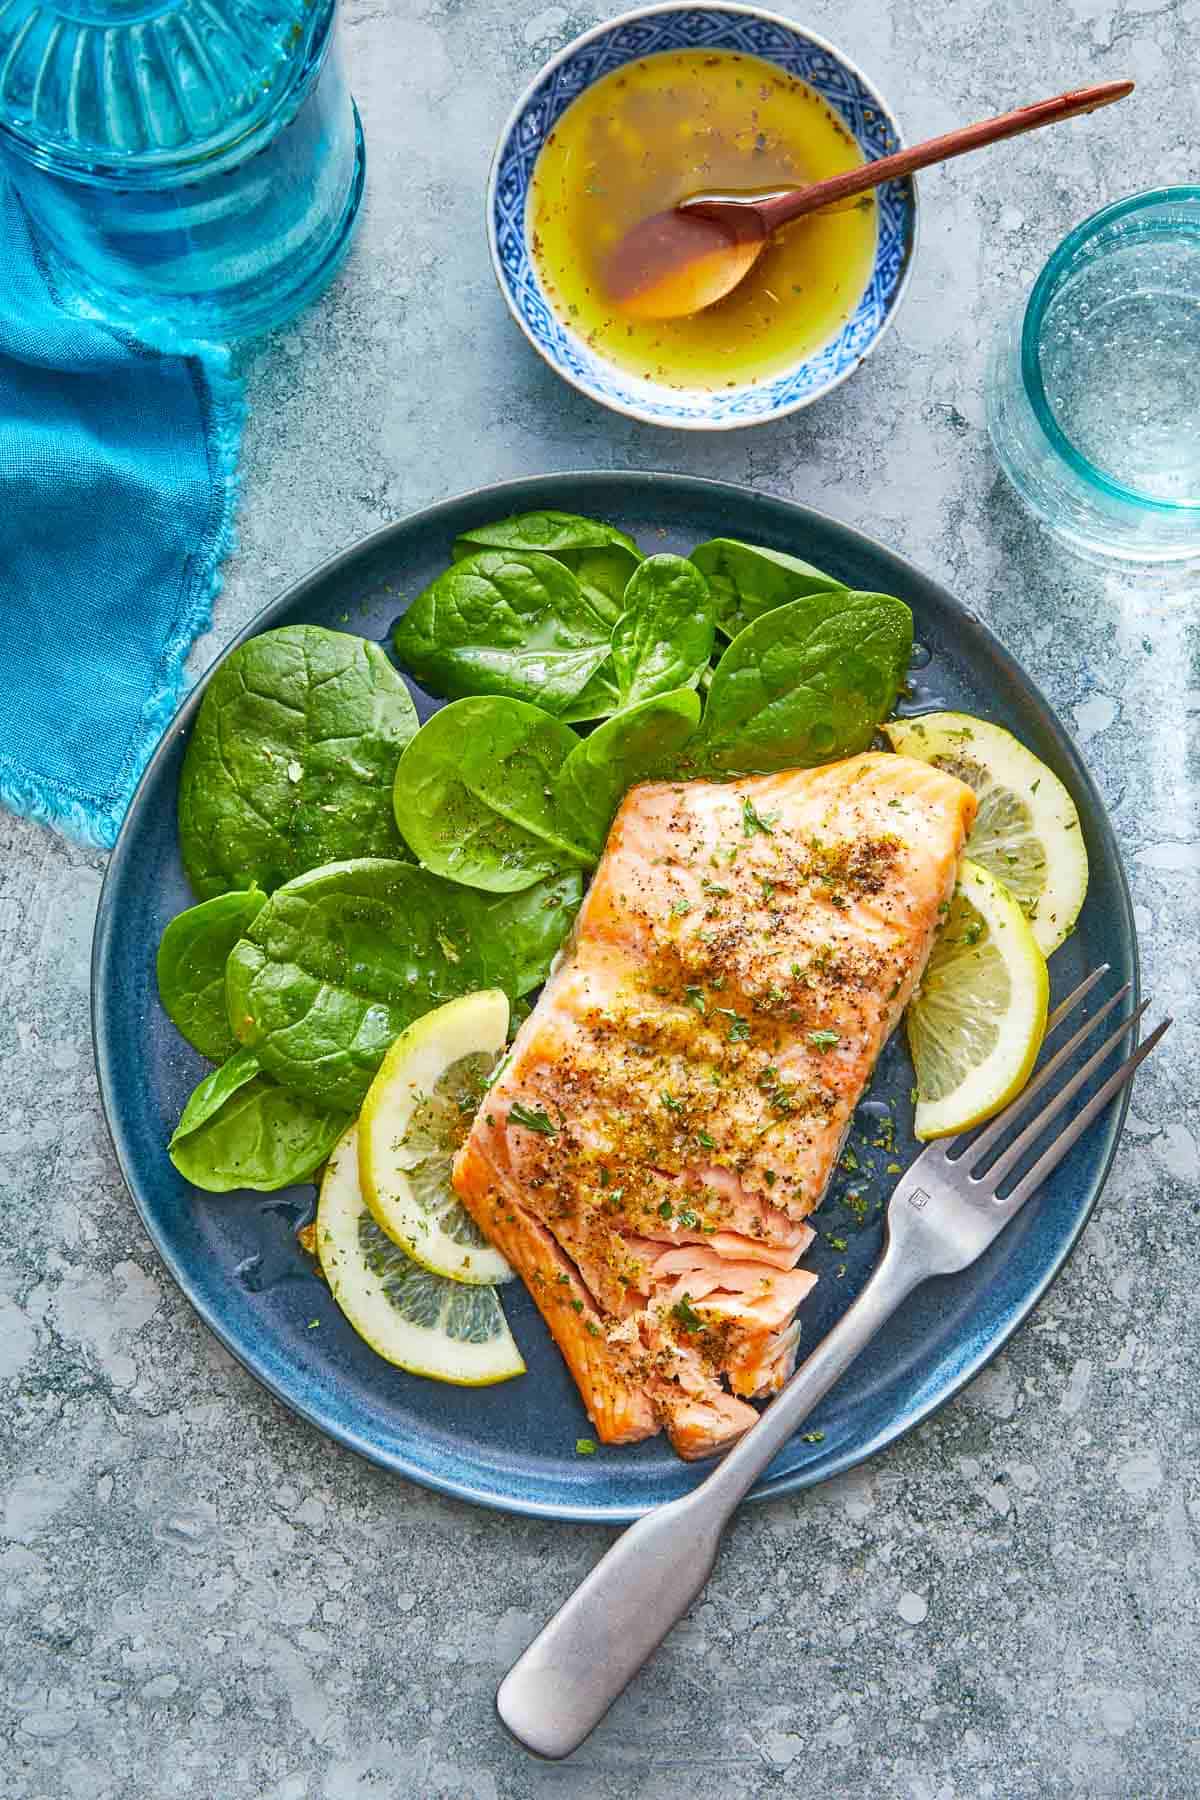 a broiled salmon fillet on a plate with lemon slices and a spinach salad with a fork next to a bowl of ladolemono dressing with a wooden spoon.